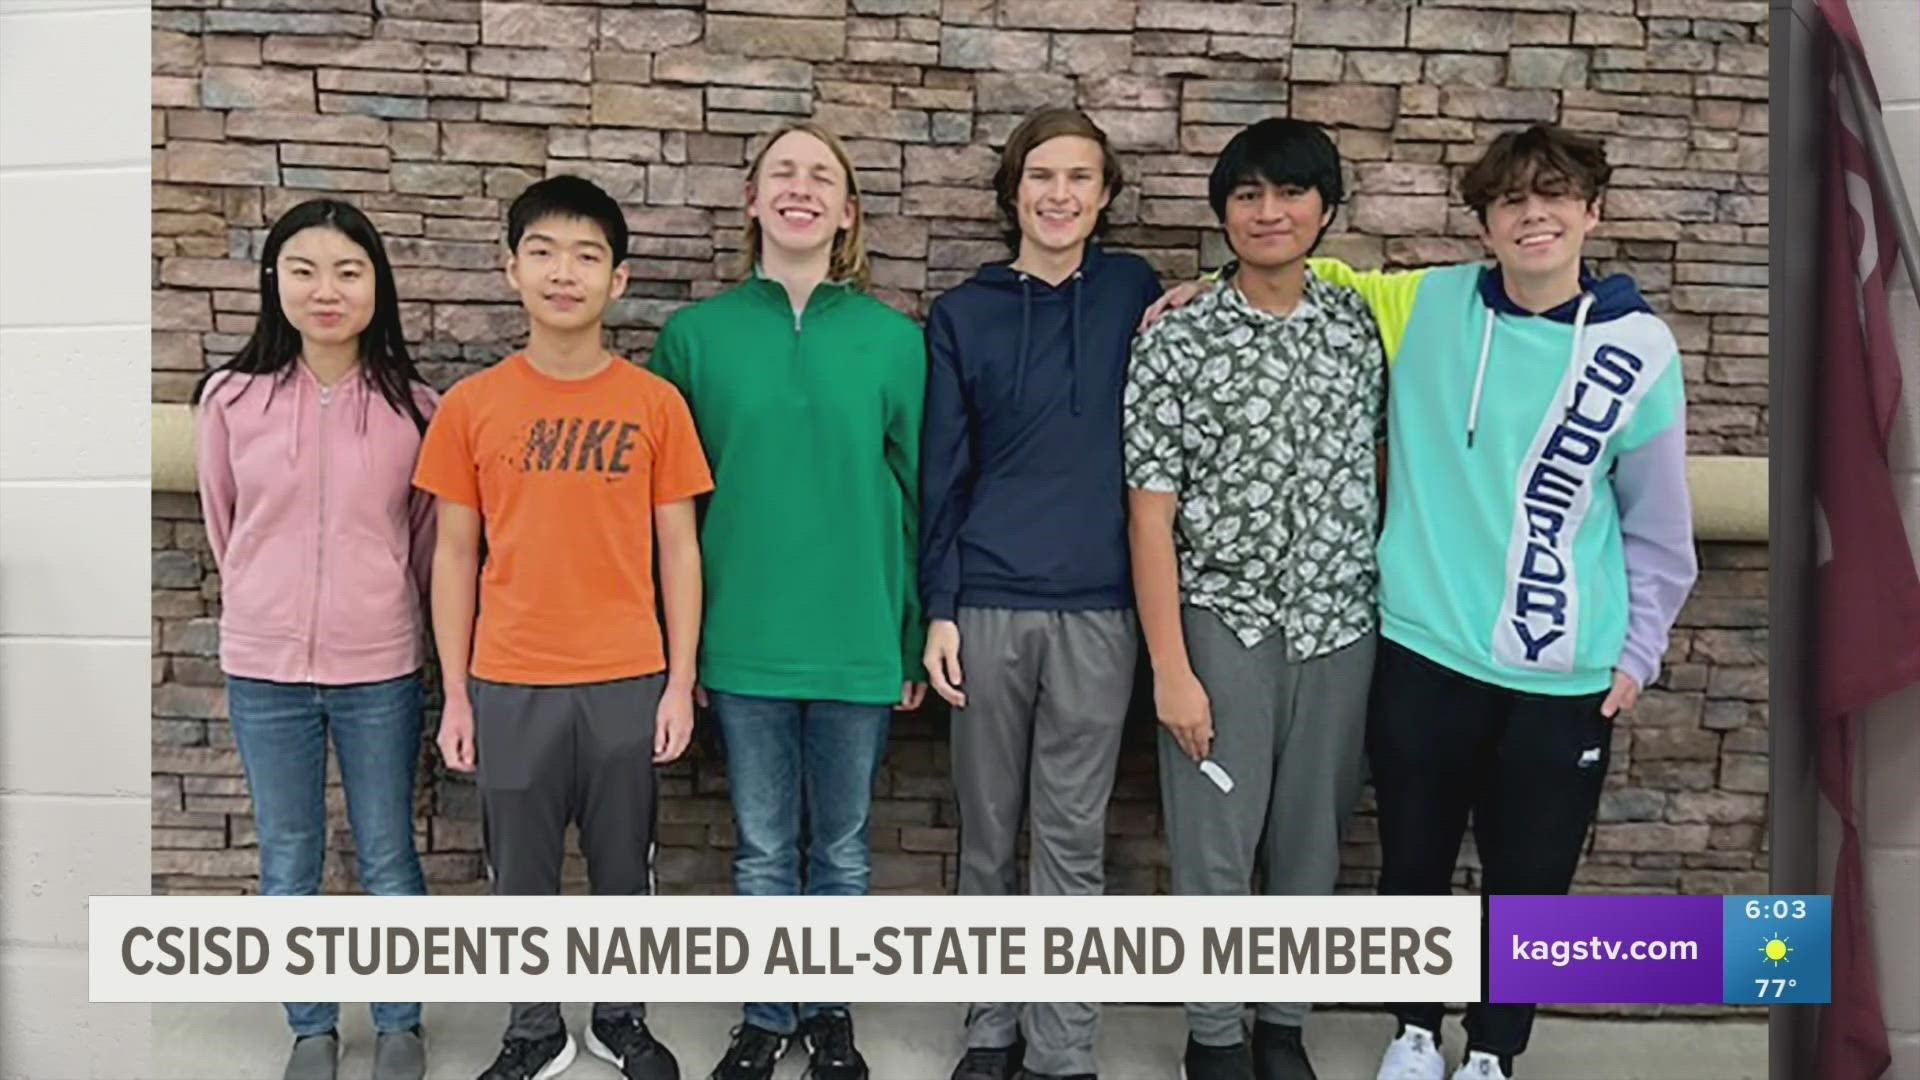 Six band members from CSISD were selected to the All-State band, which is the highest honor a music student can obtain in Texas.